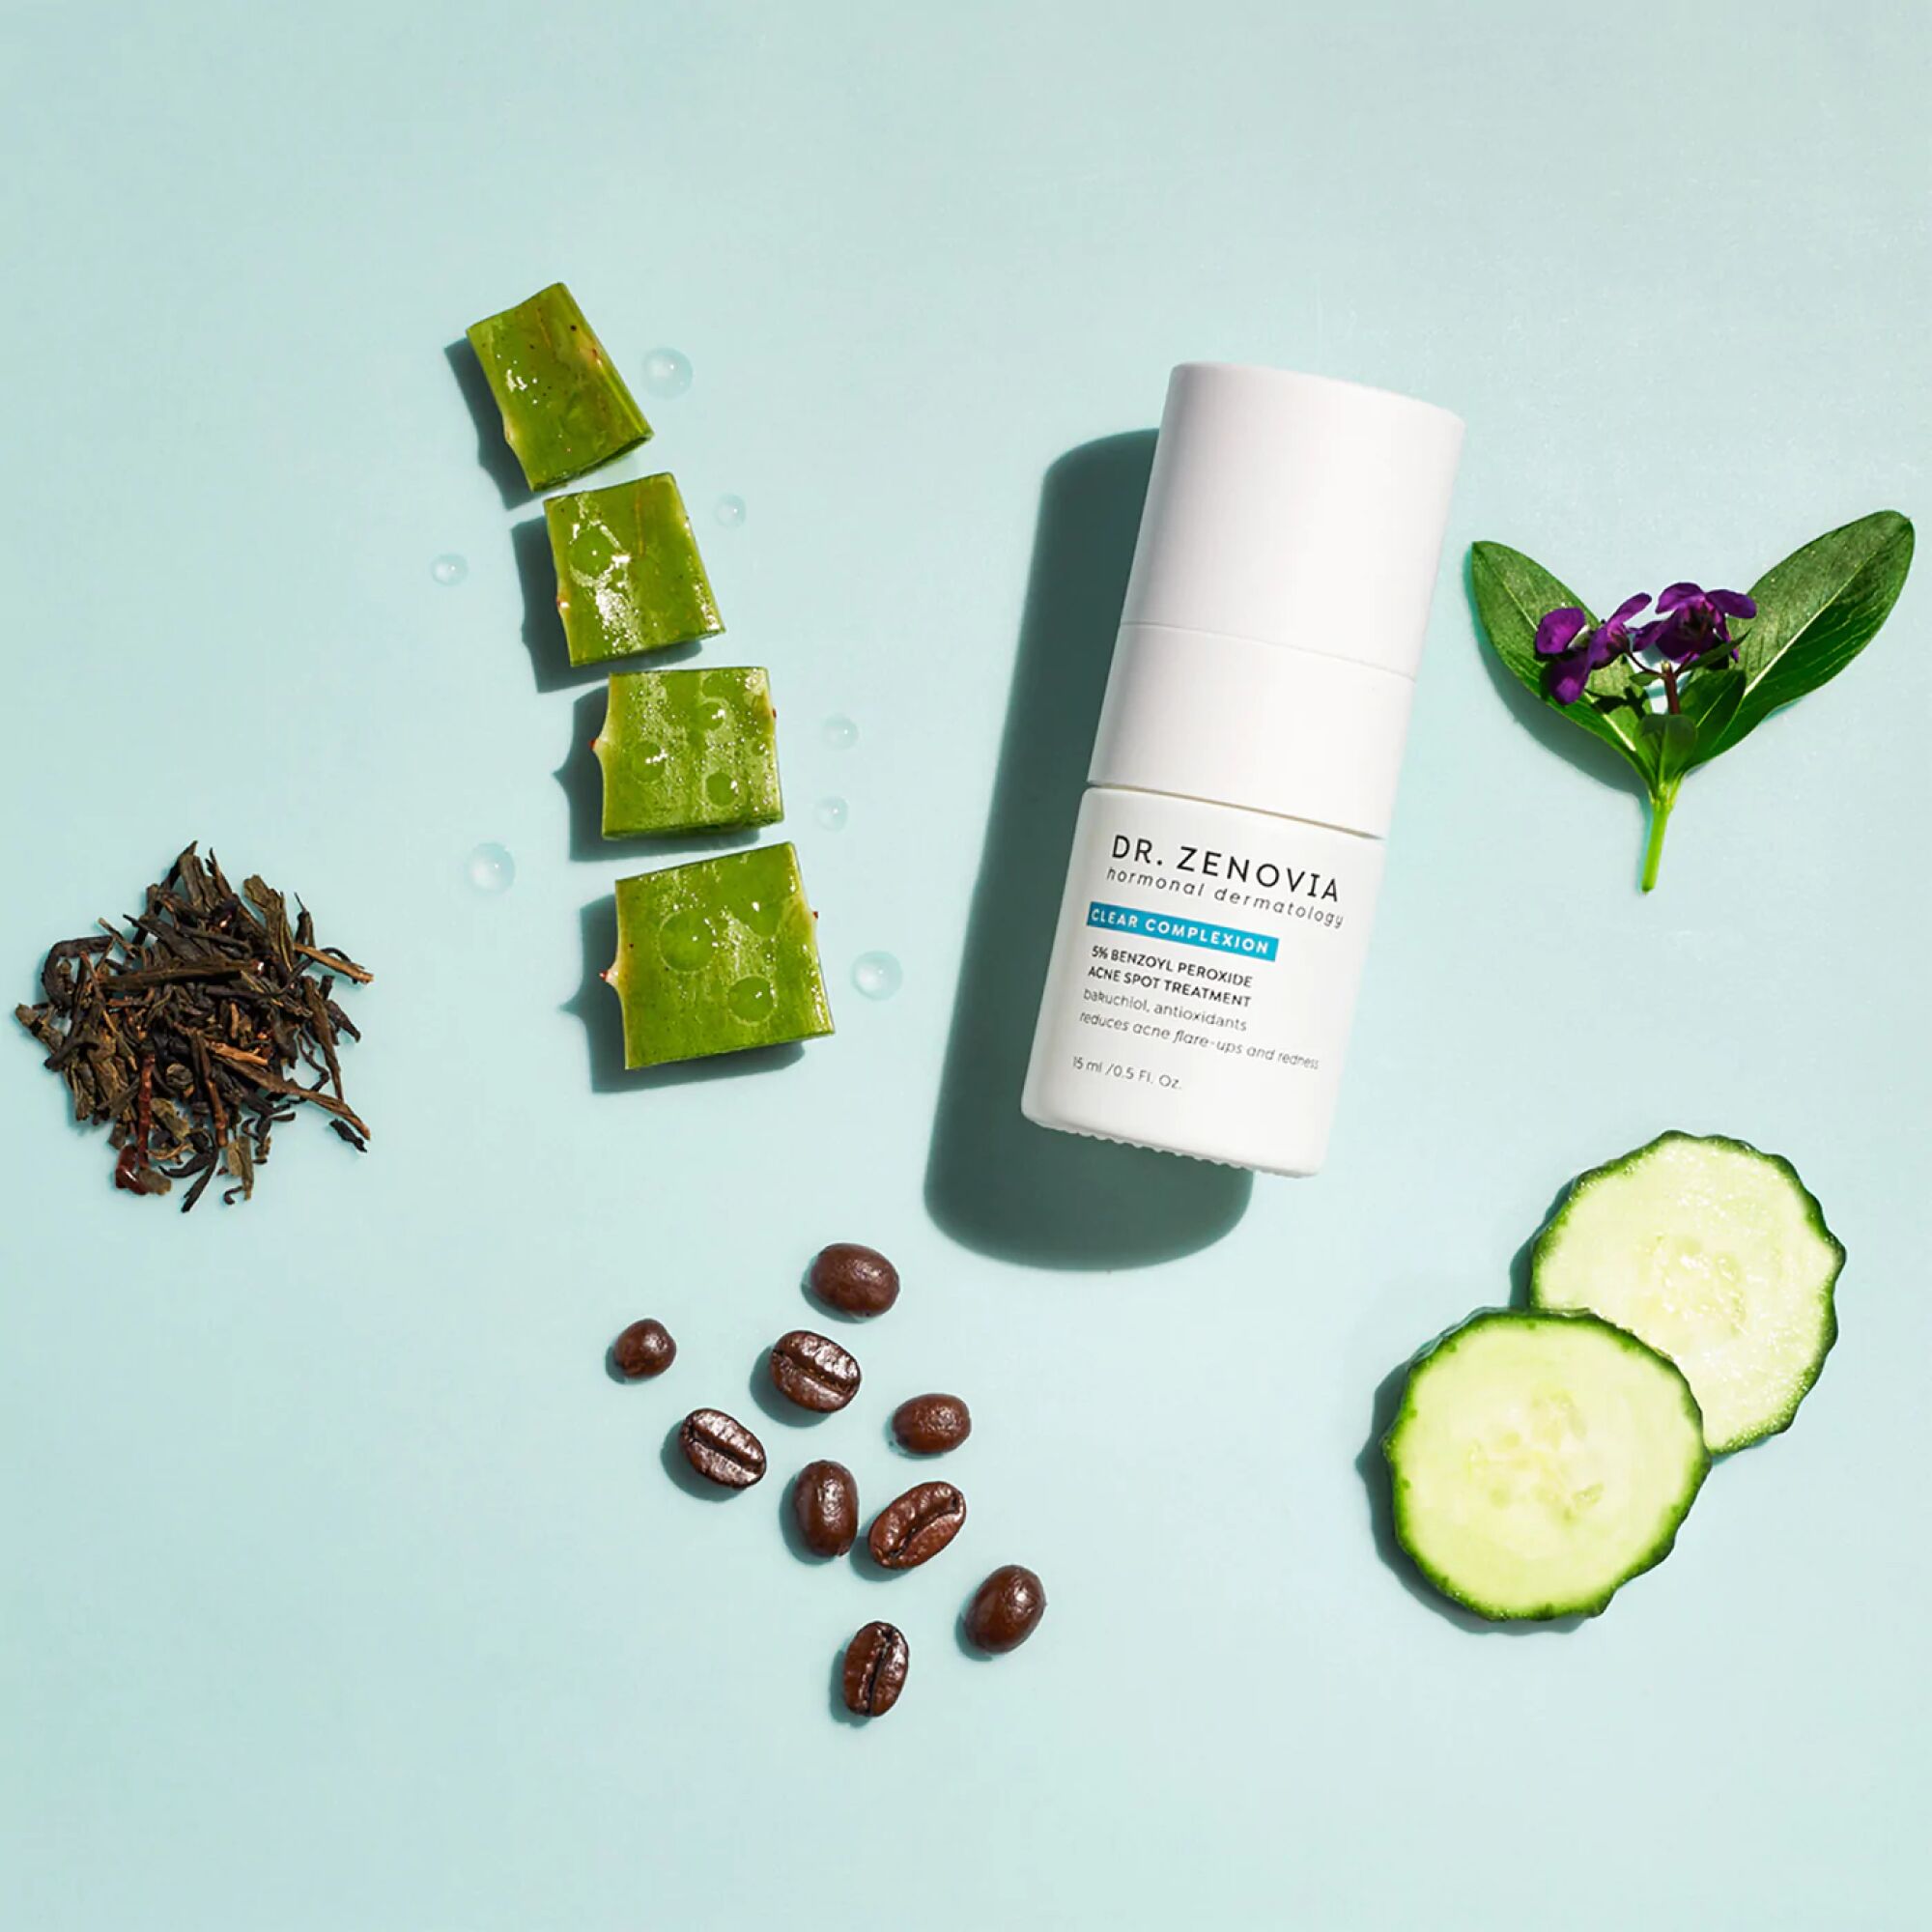 Dr. Zenovia acne spot treatment bottle surrounded by pieces of aloe, cucumber, coffee beans, florals, and dried herbs